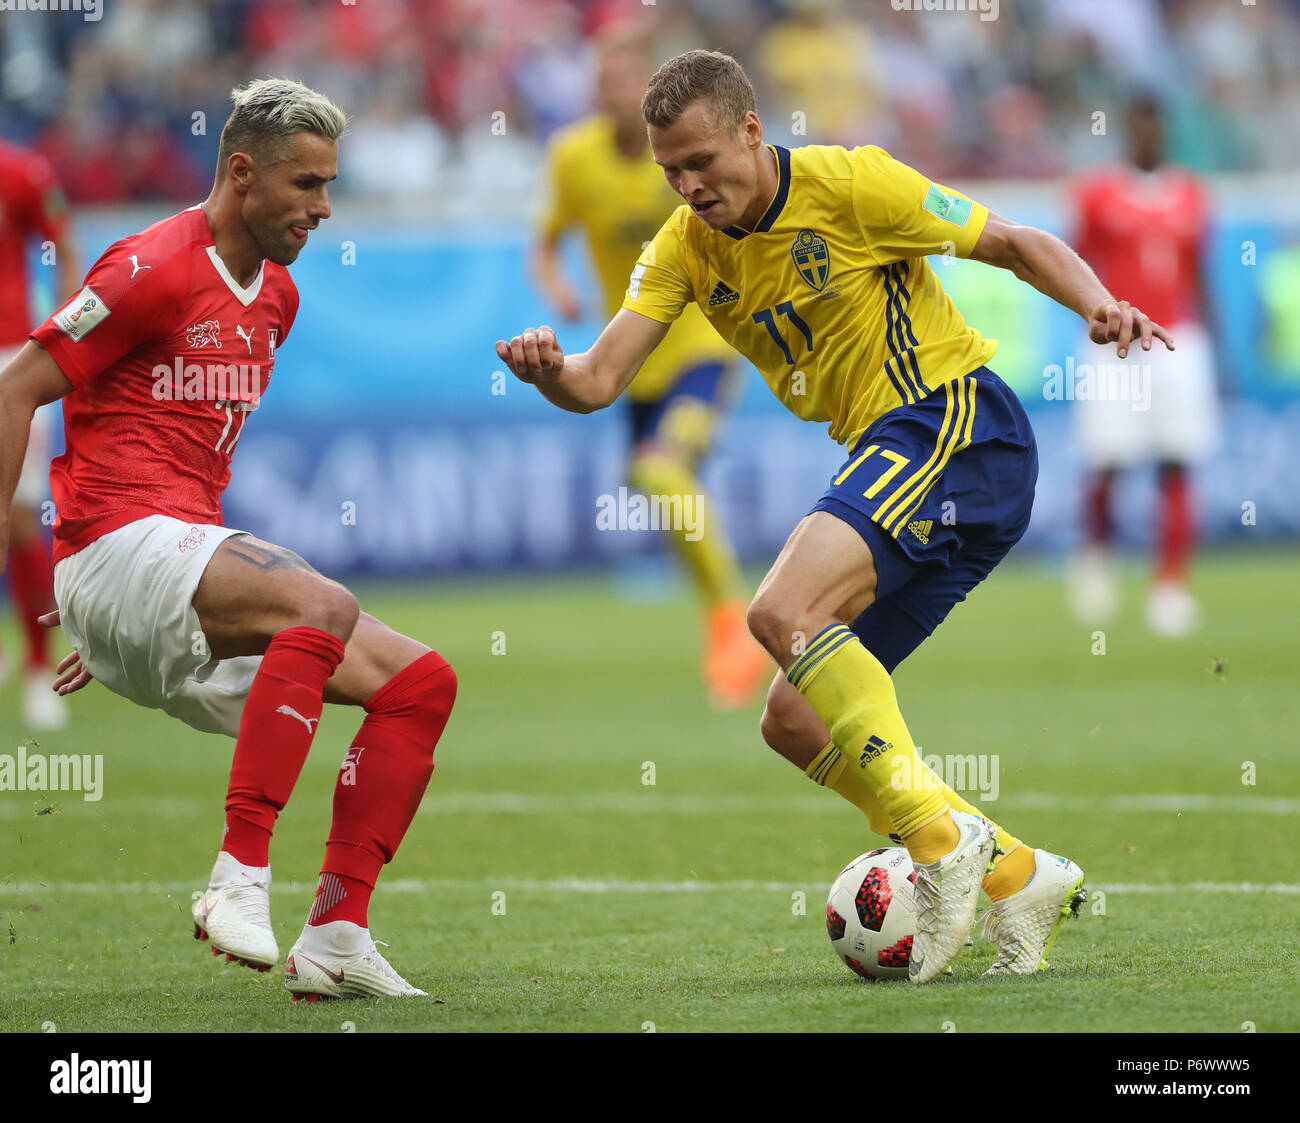 Saint Petersburg, Russia. 3rd July, 2018. Valon Behrami (L) of Switzerland vies with Viktor Claesson of Sweden during the 2018 FIFA World Cup round of 16 match between Switzerland and Sweden in Saint Petersburg, Russia, July 3, 2018. Sweden won 1-0 and advanced to the quarter-final. Credit: Cao Can/Xinhua/Alamy Live News Stock Photo